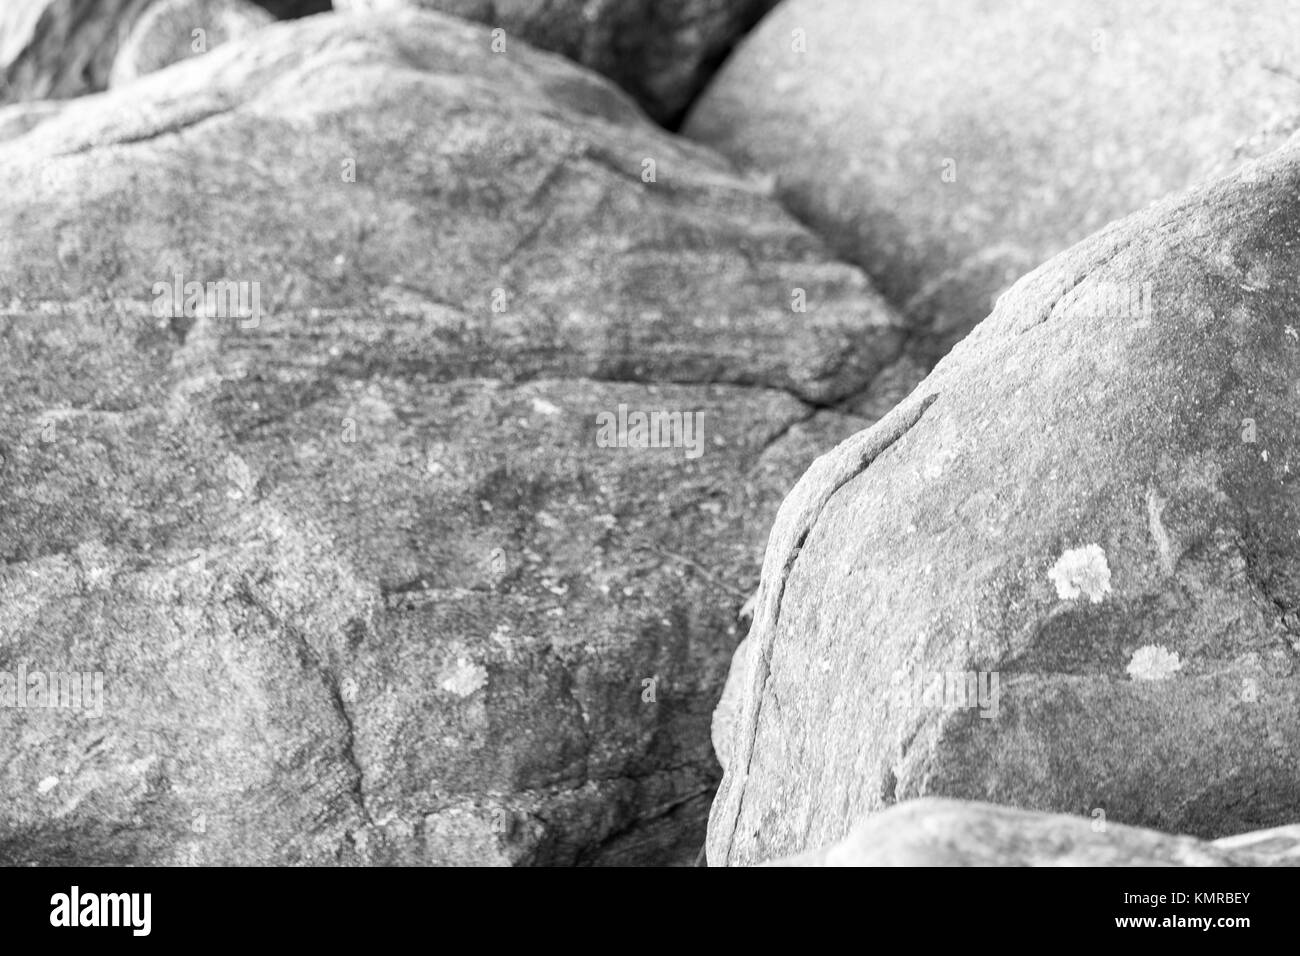 detail of boulders in east hampton, ny Stock Photo